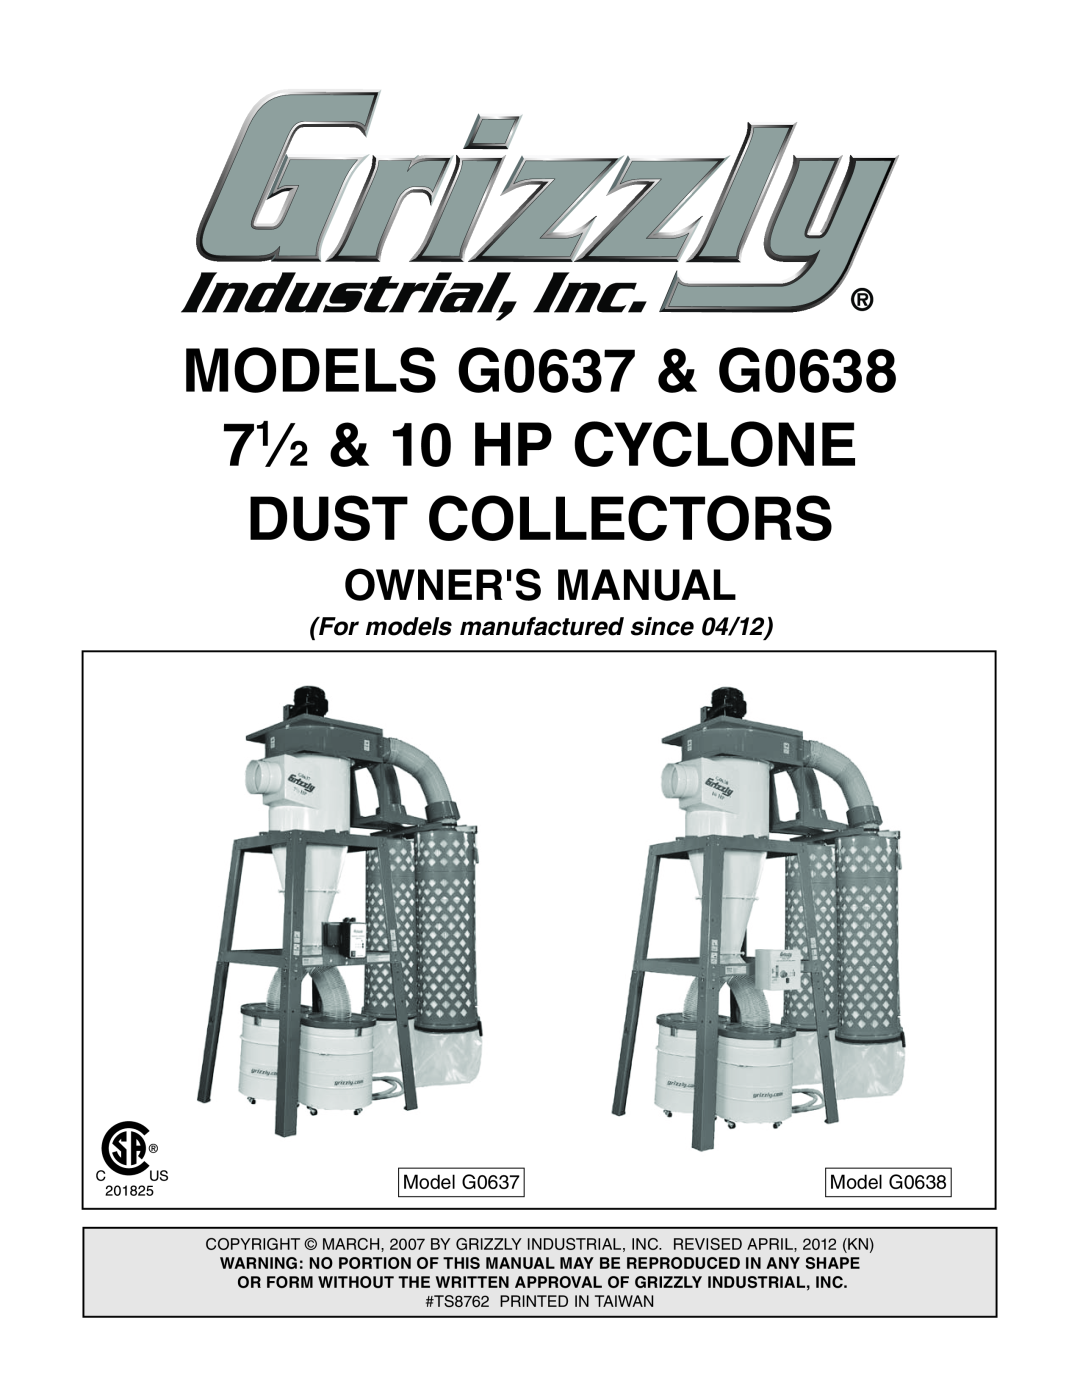 Grizzly owner manual BdYZa<%+, MODEL G0637/G0638 71/2 & 10 HP CYCLONE DUST, Collectors 